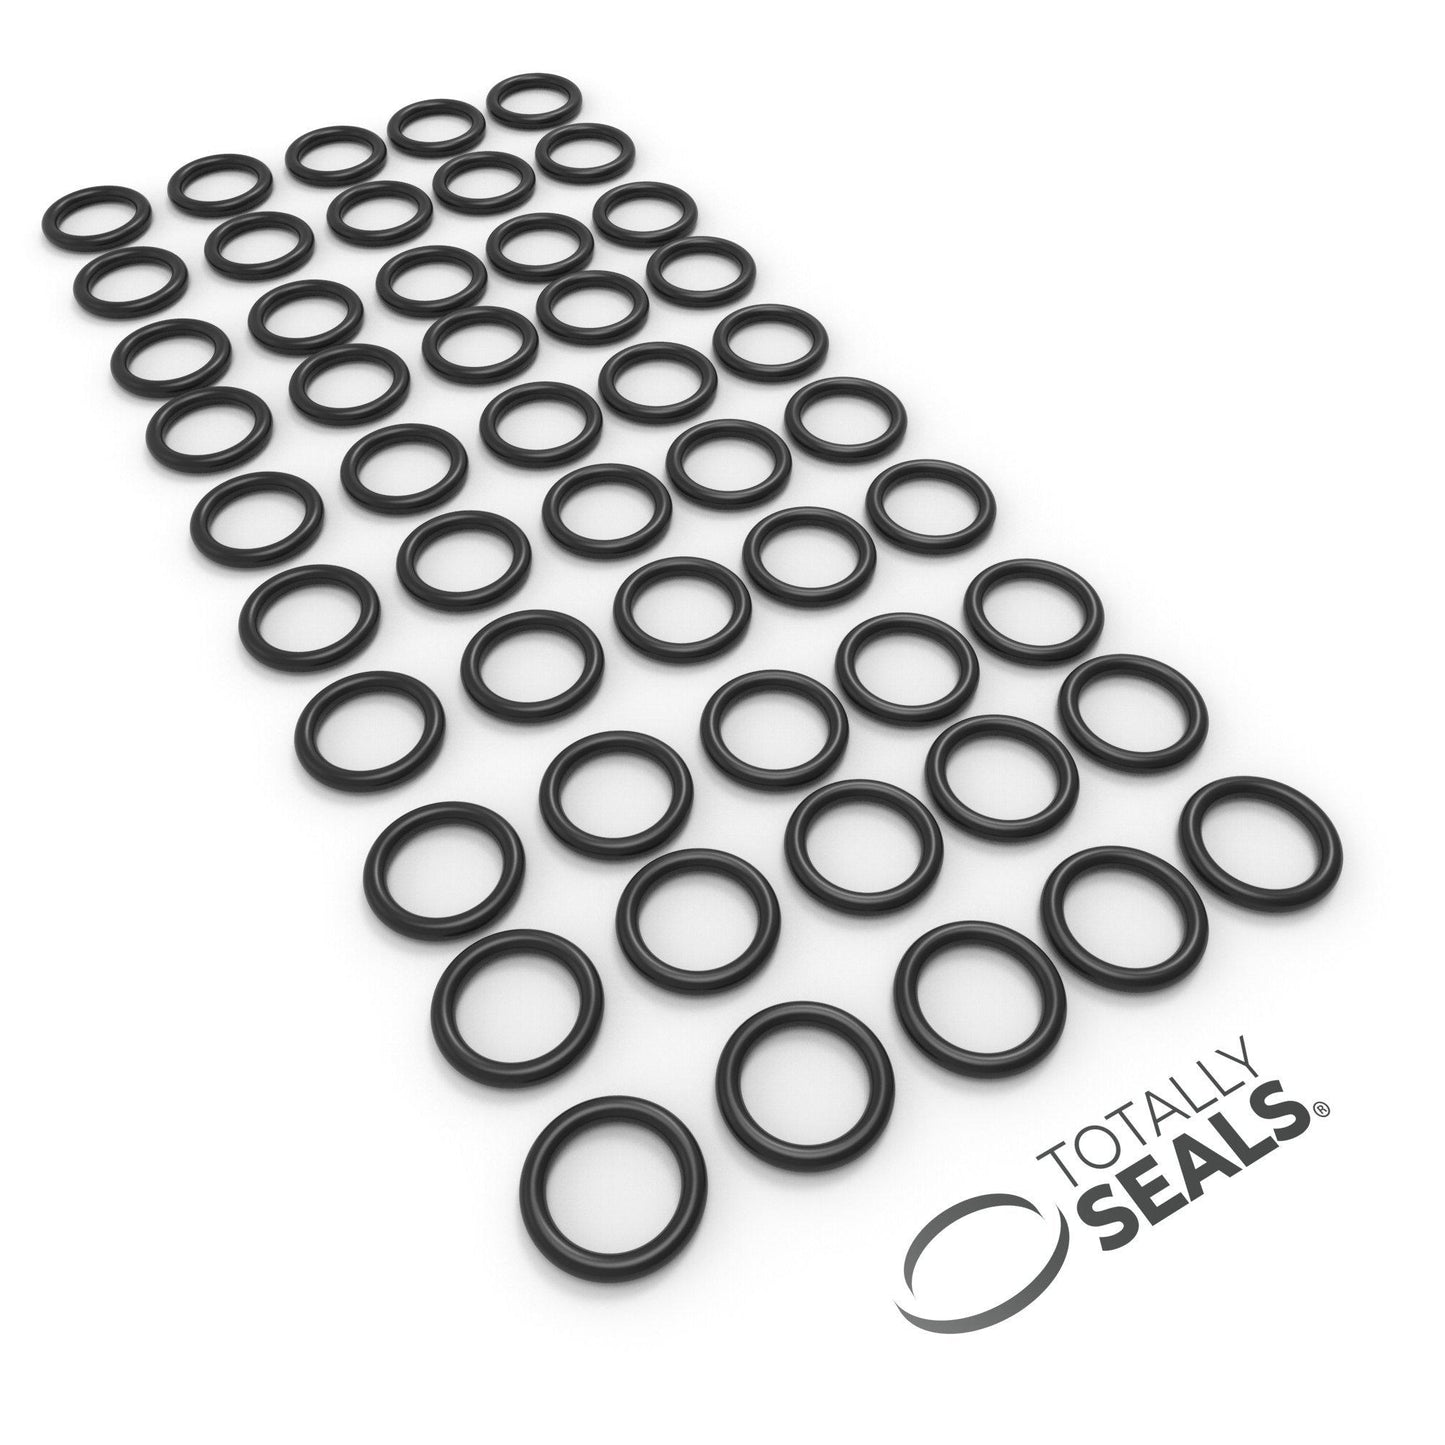 13mm x 1.5mm (16mm OD) Nitrile O-Rings - Totally Seals®